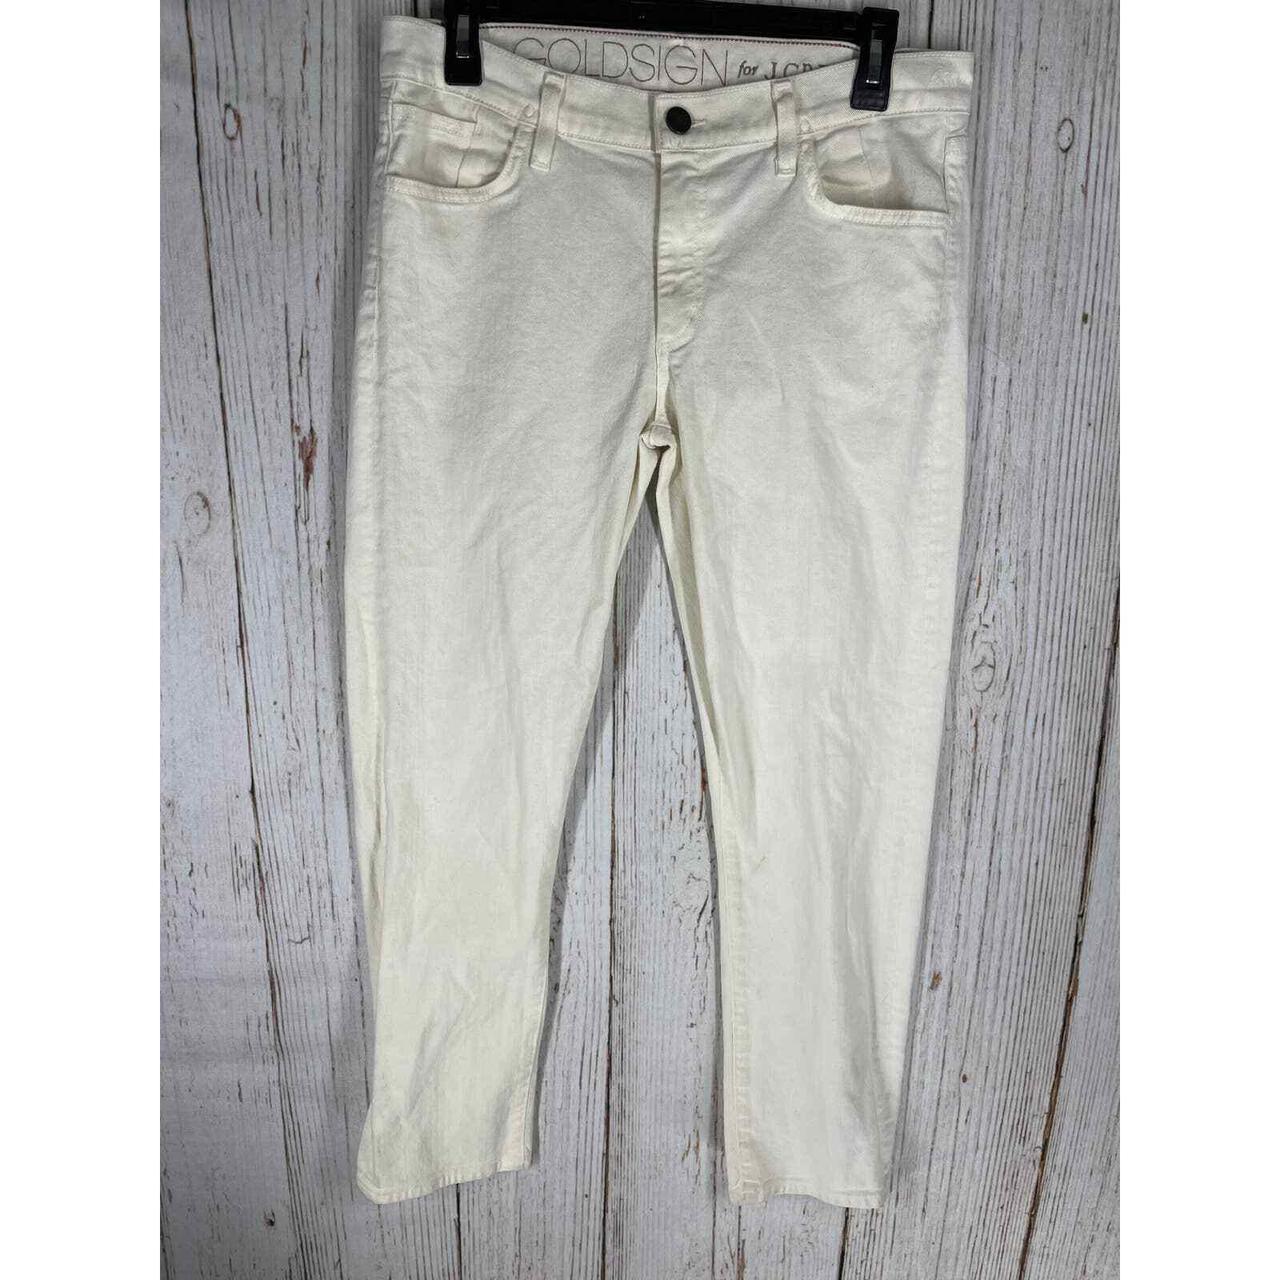 Product Image 1 - GOLDSIGN for J.CREW Jeans Women